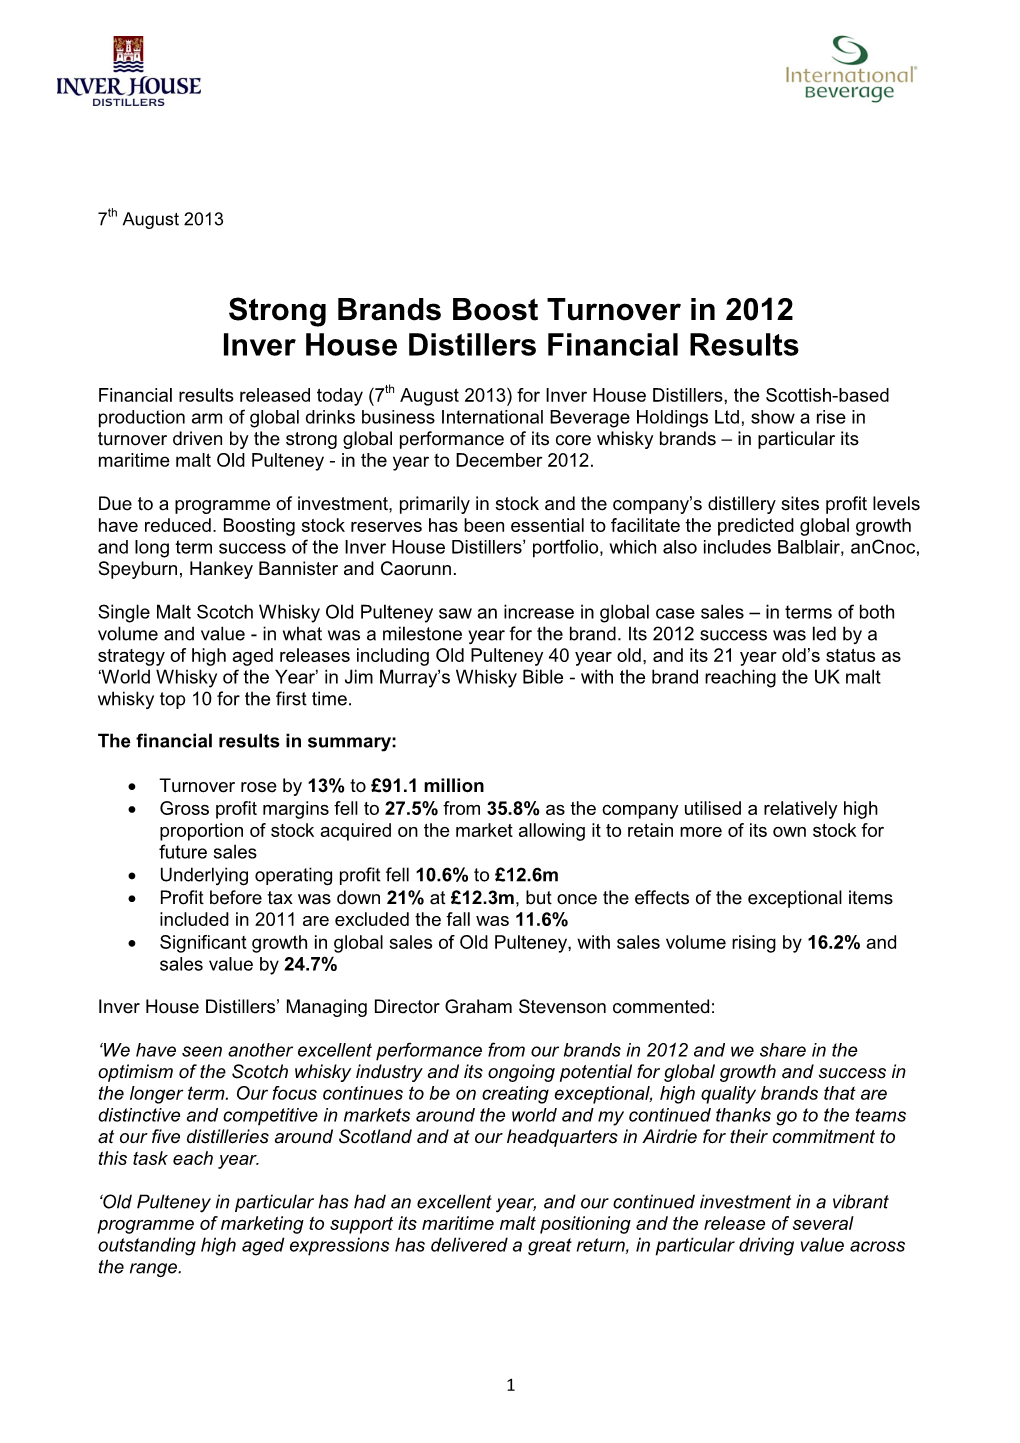 Strong Brands Boost Turnover in 2012 Inver House Distillers Financial Results